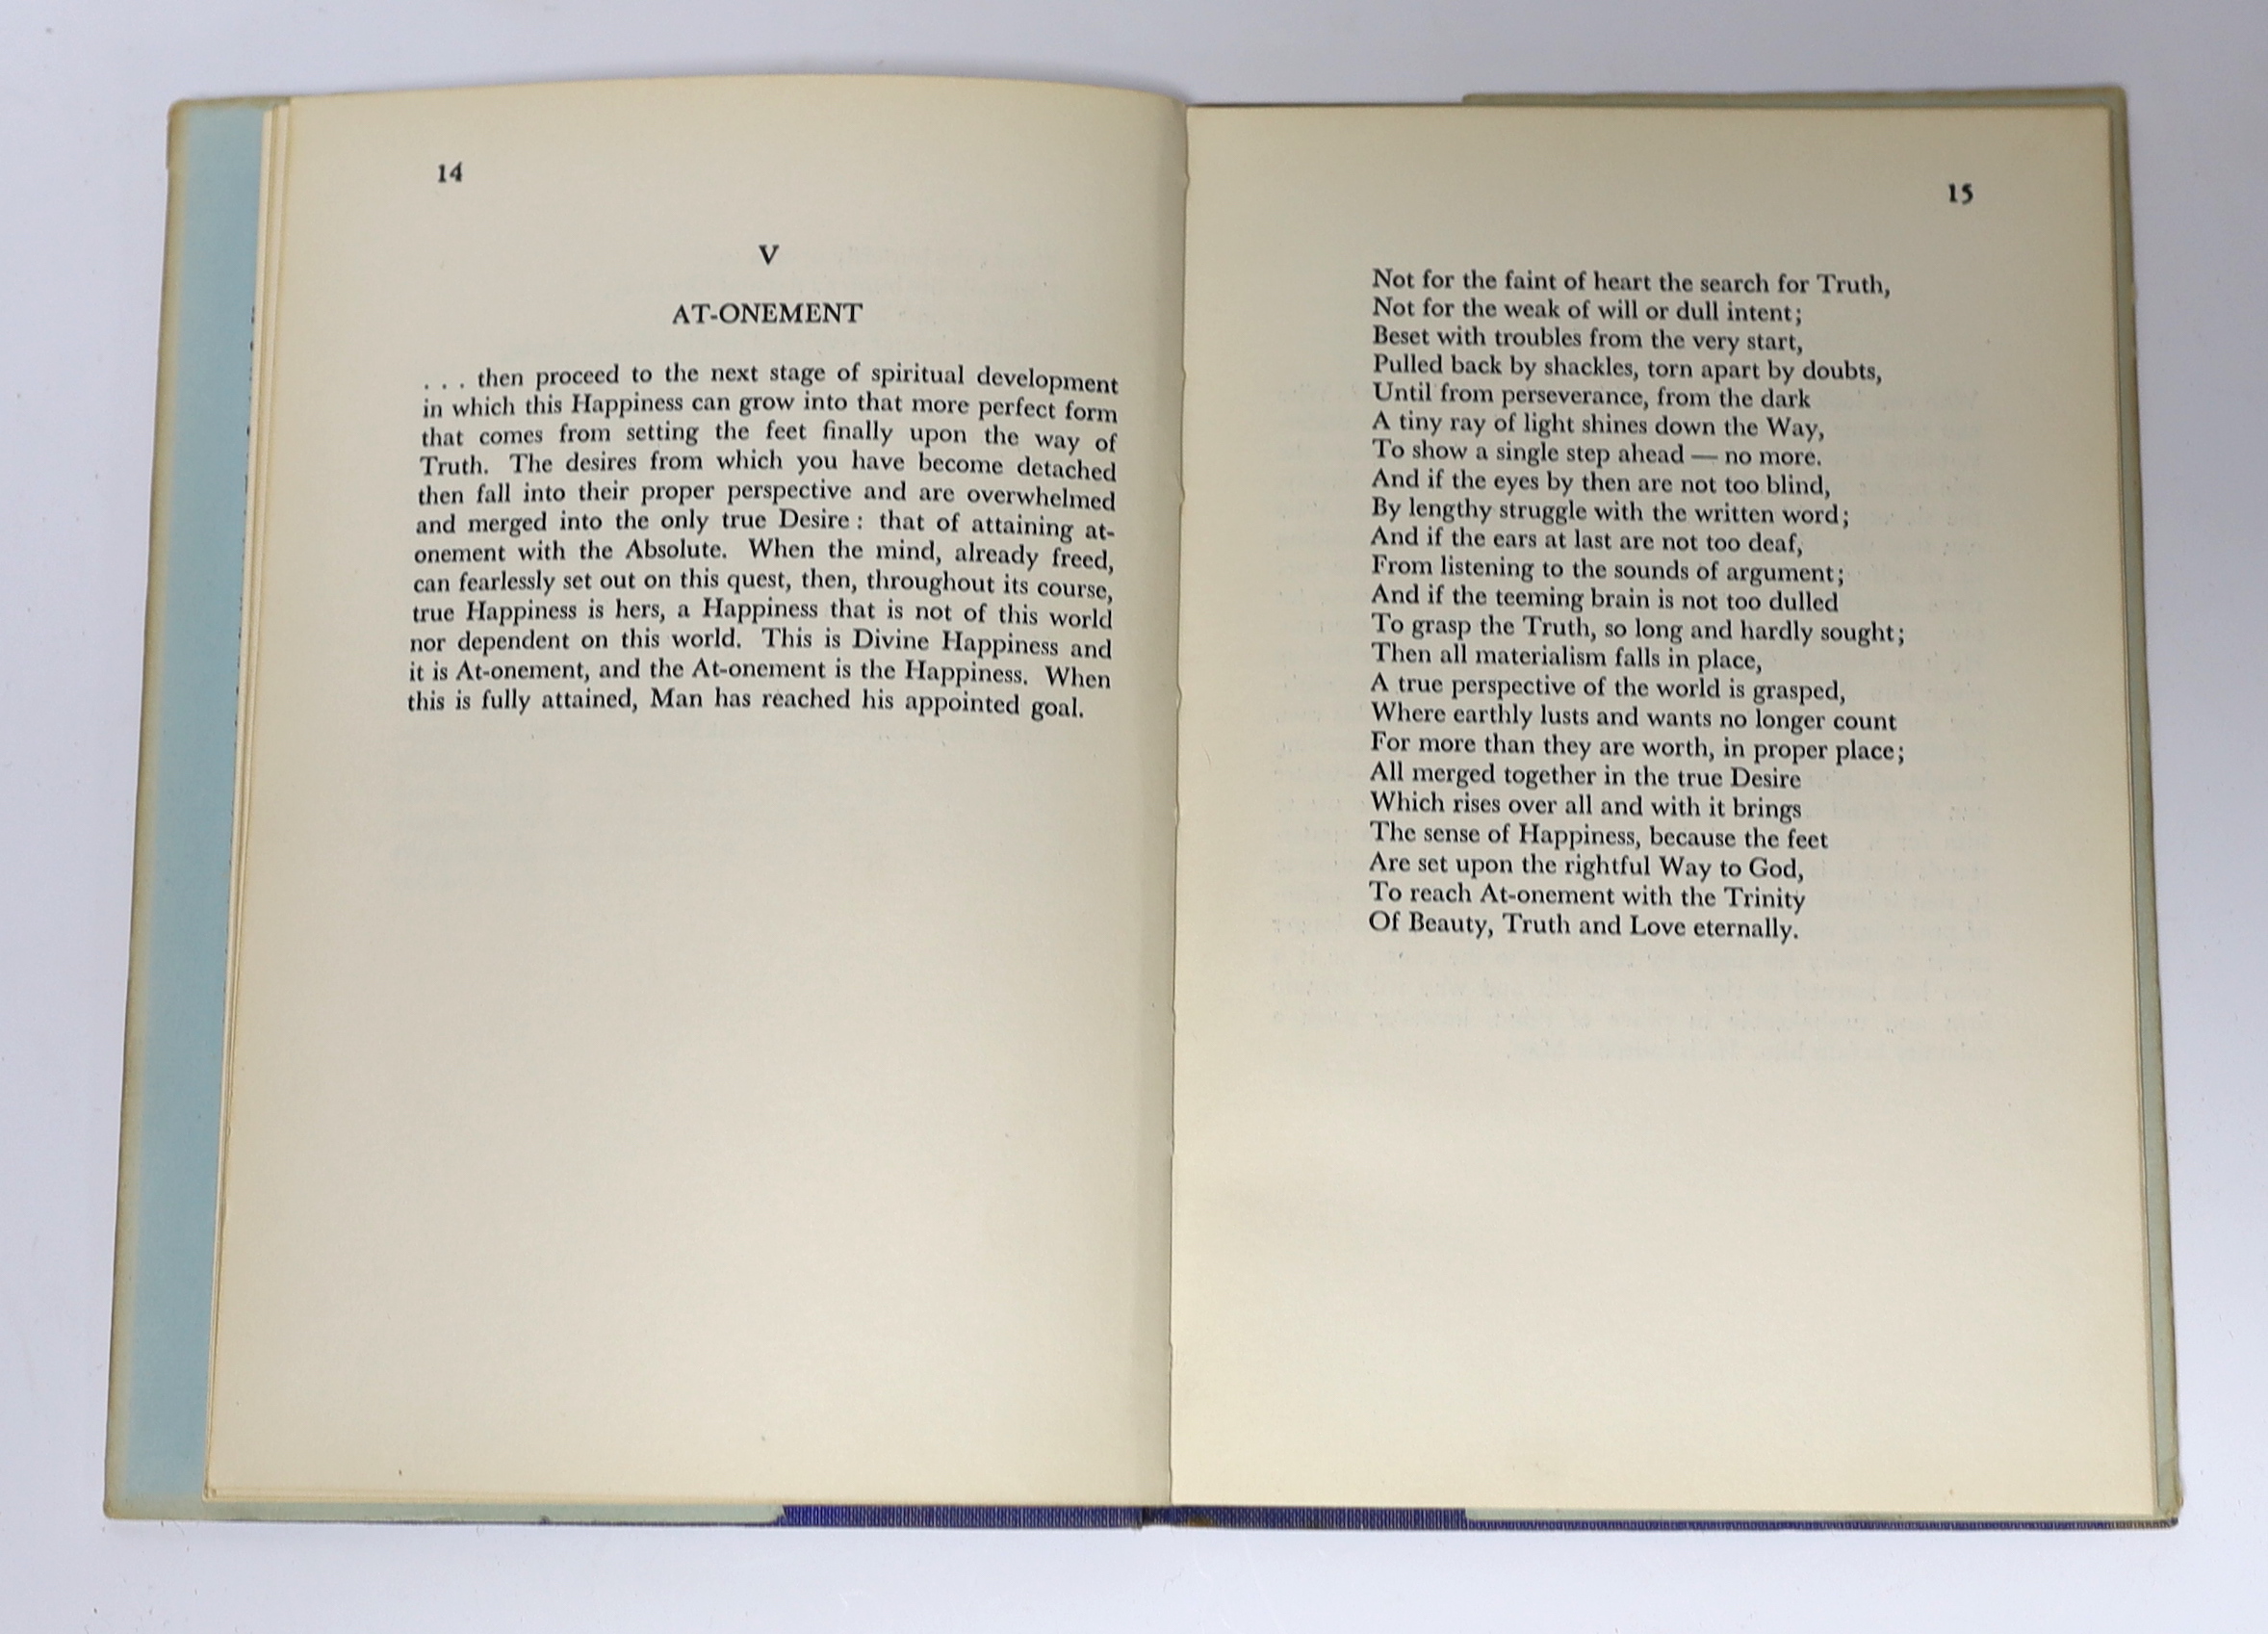 Dillon, Michael - Poems of Truth, 1st edition, 8vo, purple cloth lettered gilt, in a unclipped d/j, Linden Press, 1957., Michael Laurence Dillon (1915-1962), born Laura Maude Dillon, was, in 1946, the first trans person